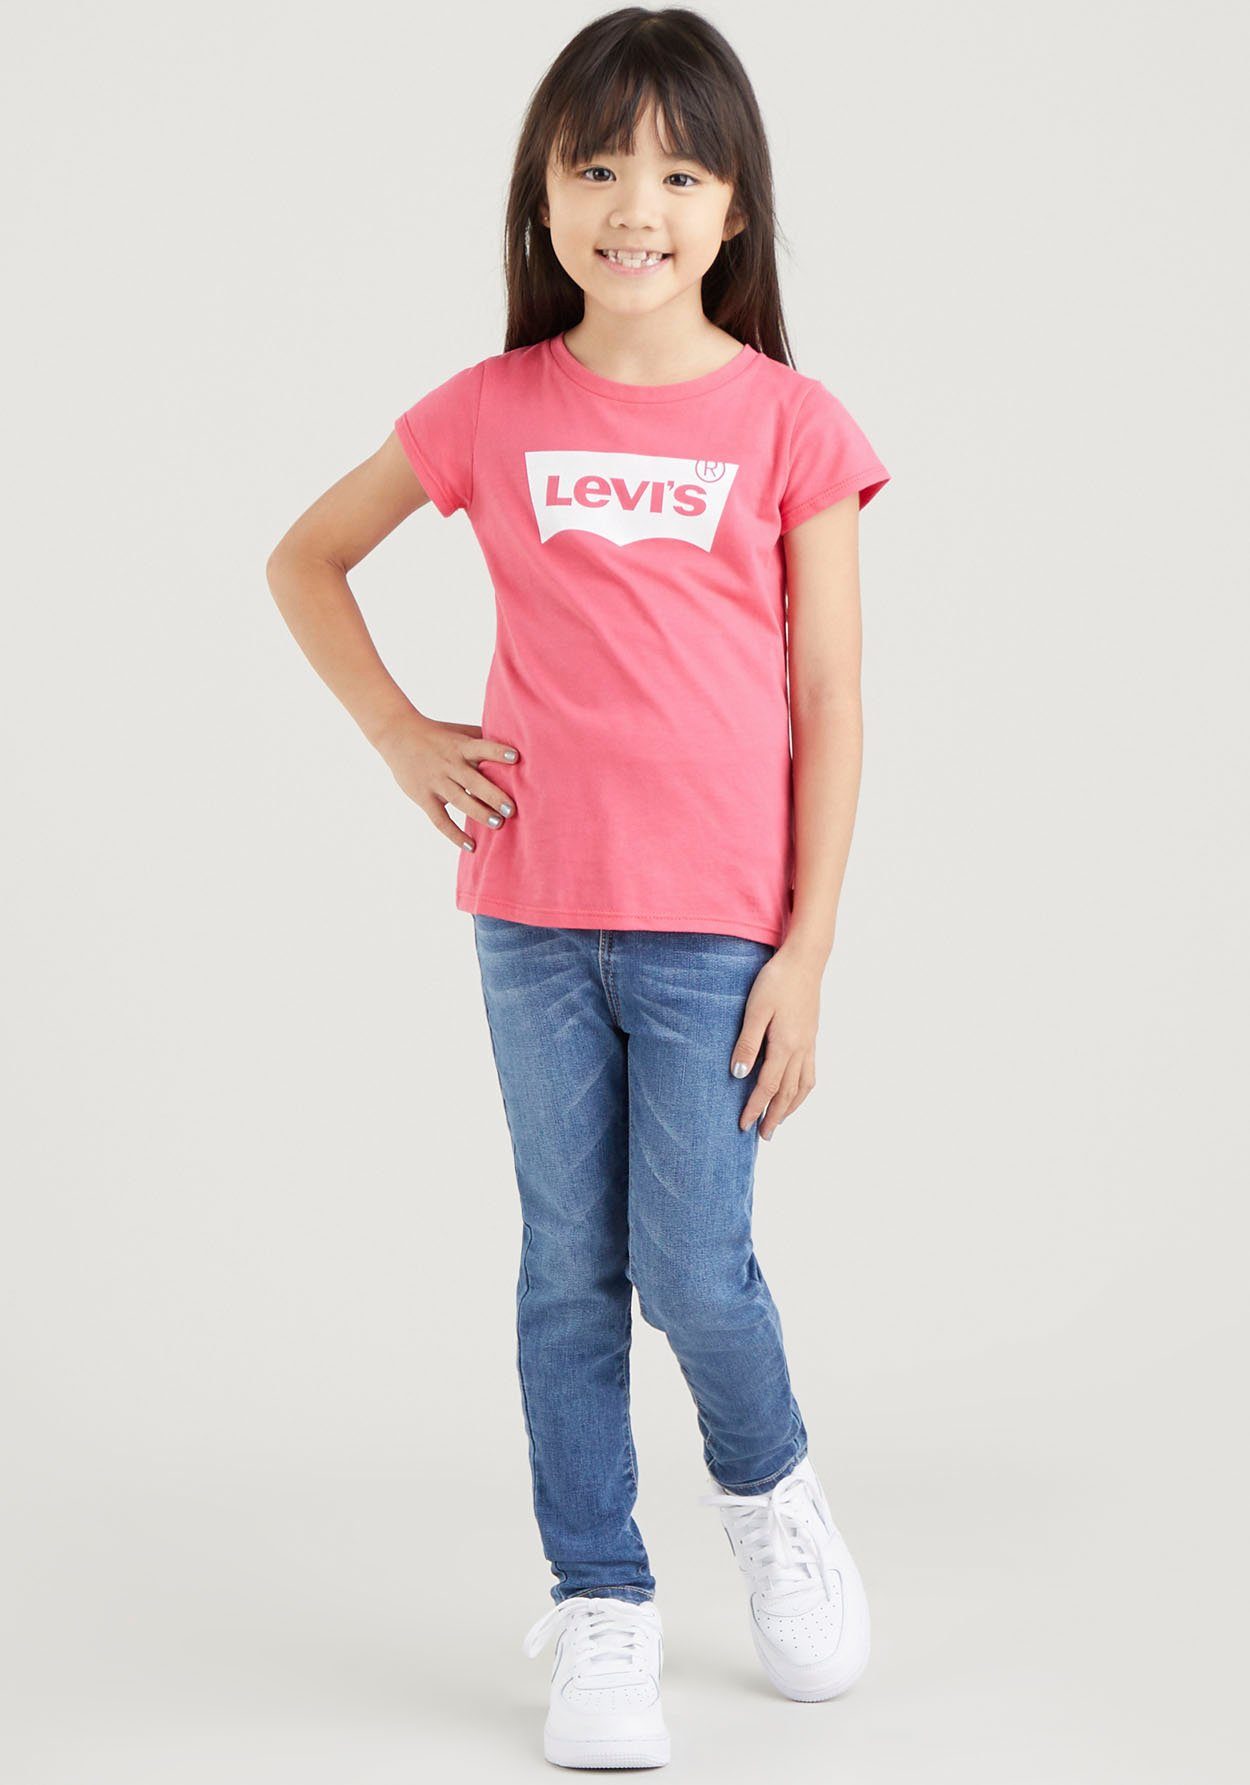 Levi's® Kids Stretch-Jeans RISE SUPER mid SKINNY used for 720™ GIRLS HIGH blue